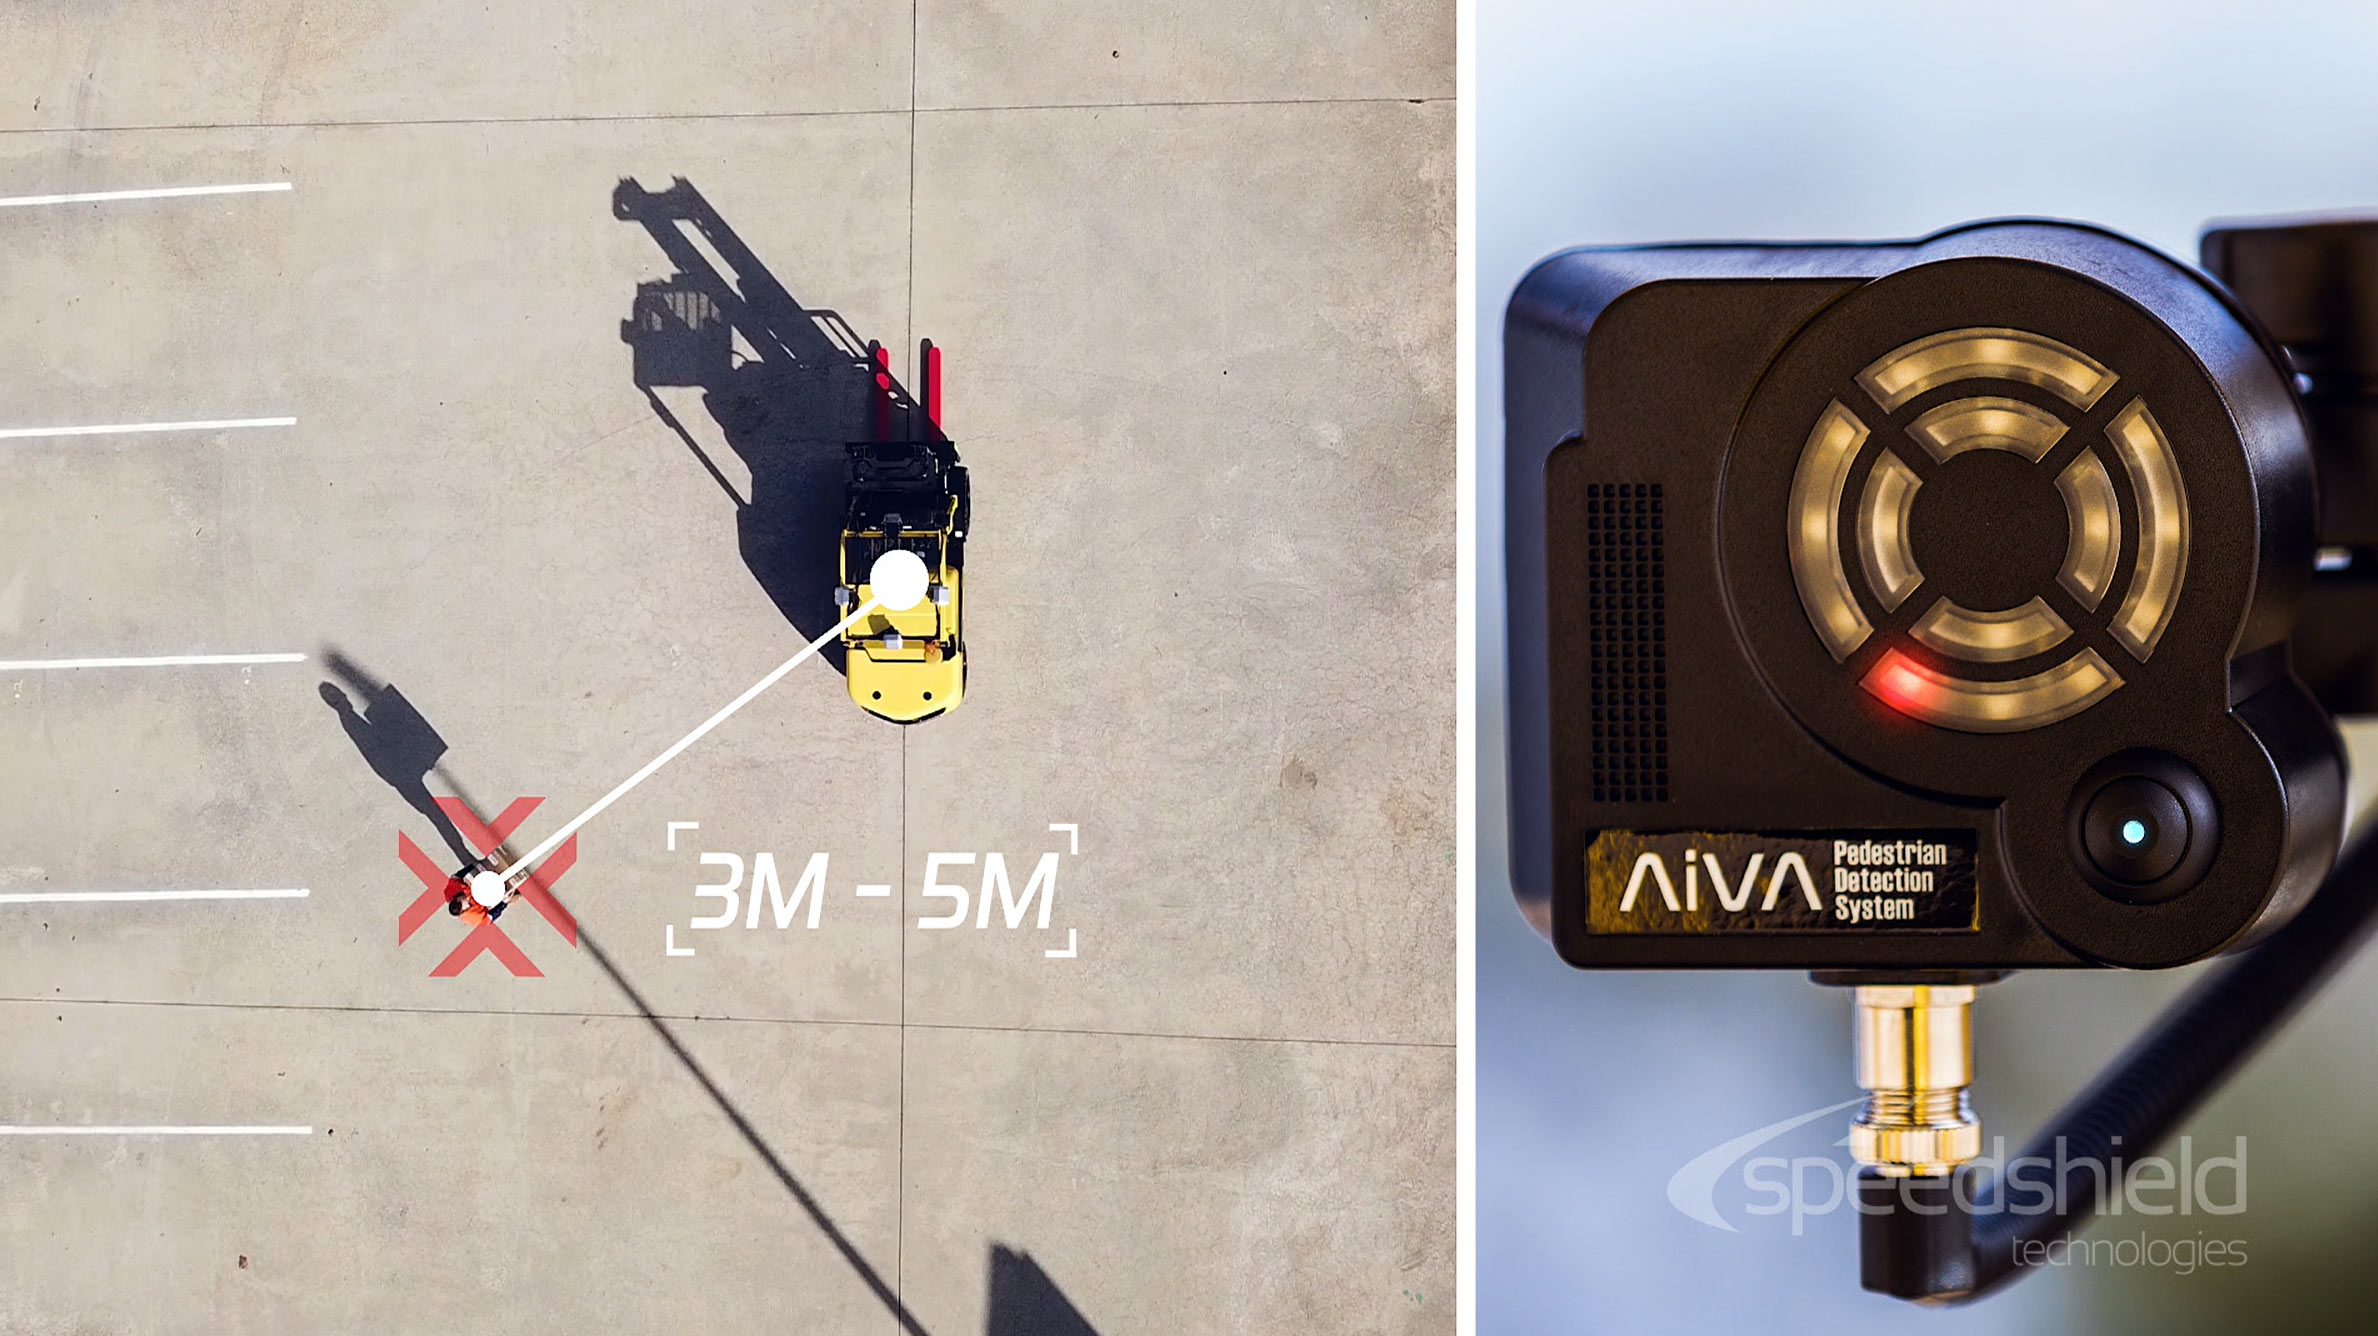 AiVA pedestrian protection system demo